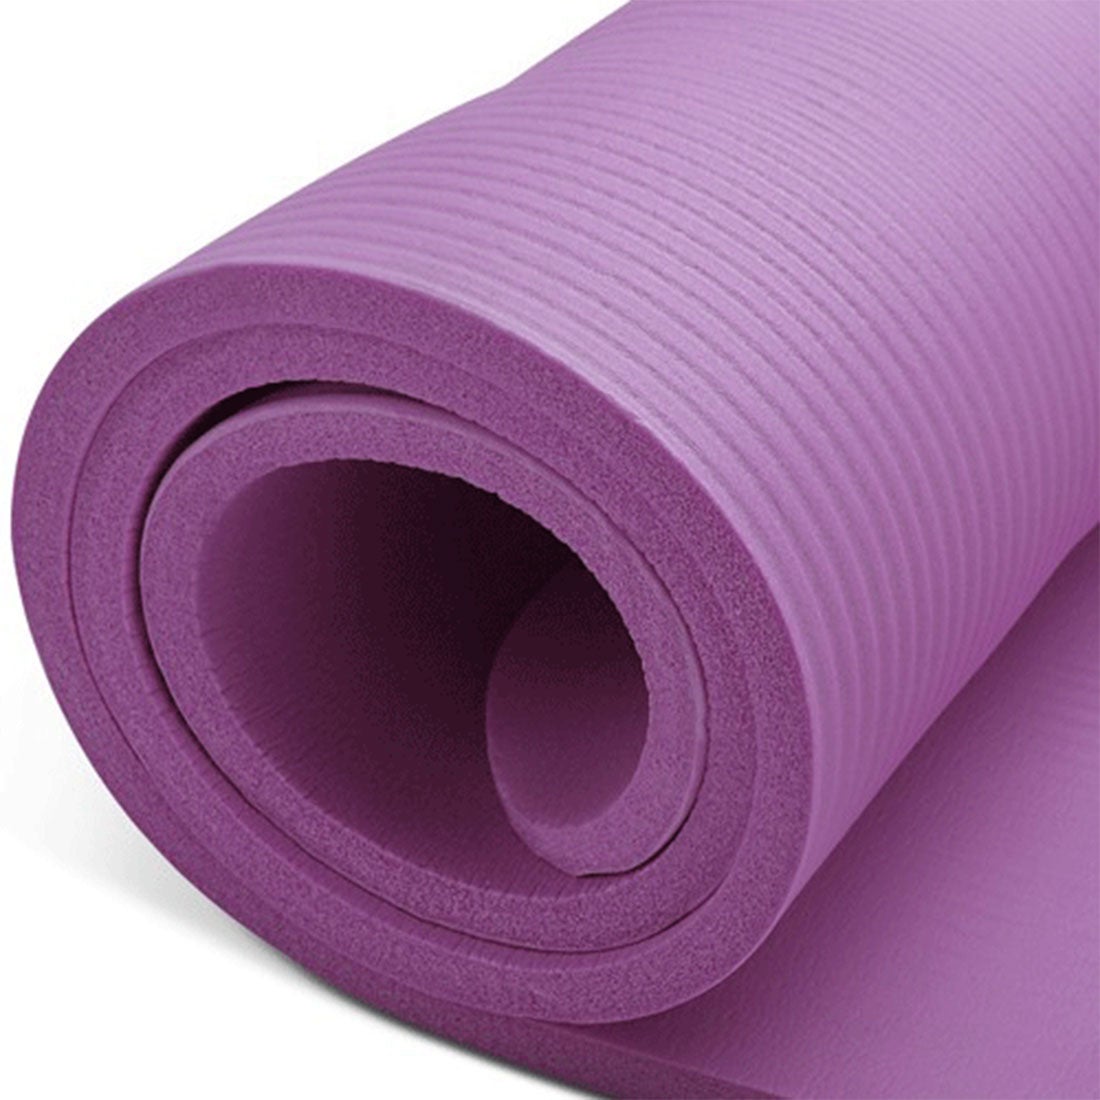 Extra Wide & Thick Yoga Mat - 72 x 32 x 1/3, Double-Sided Non